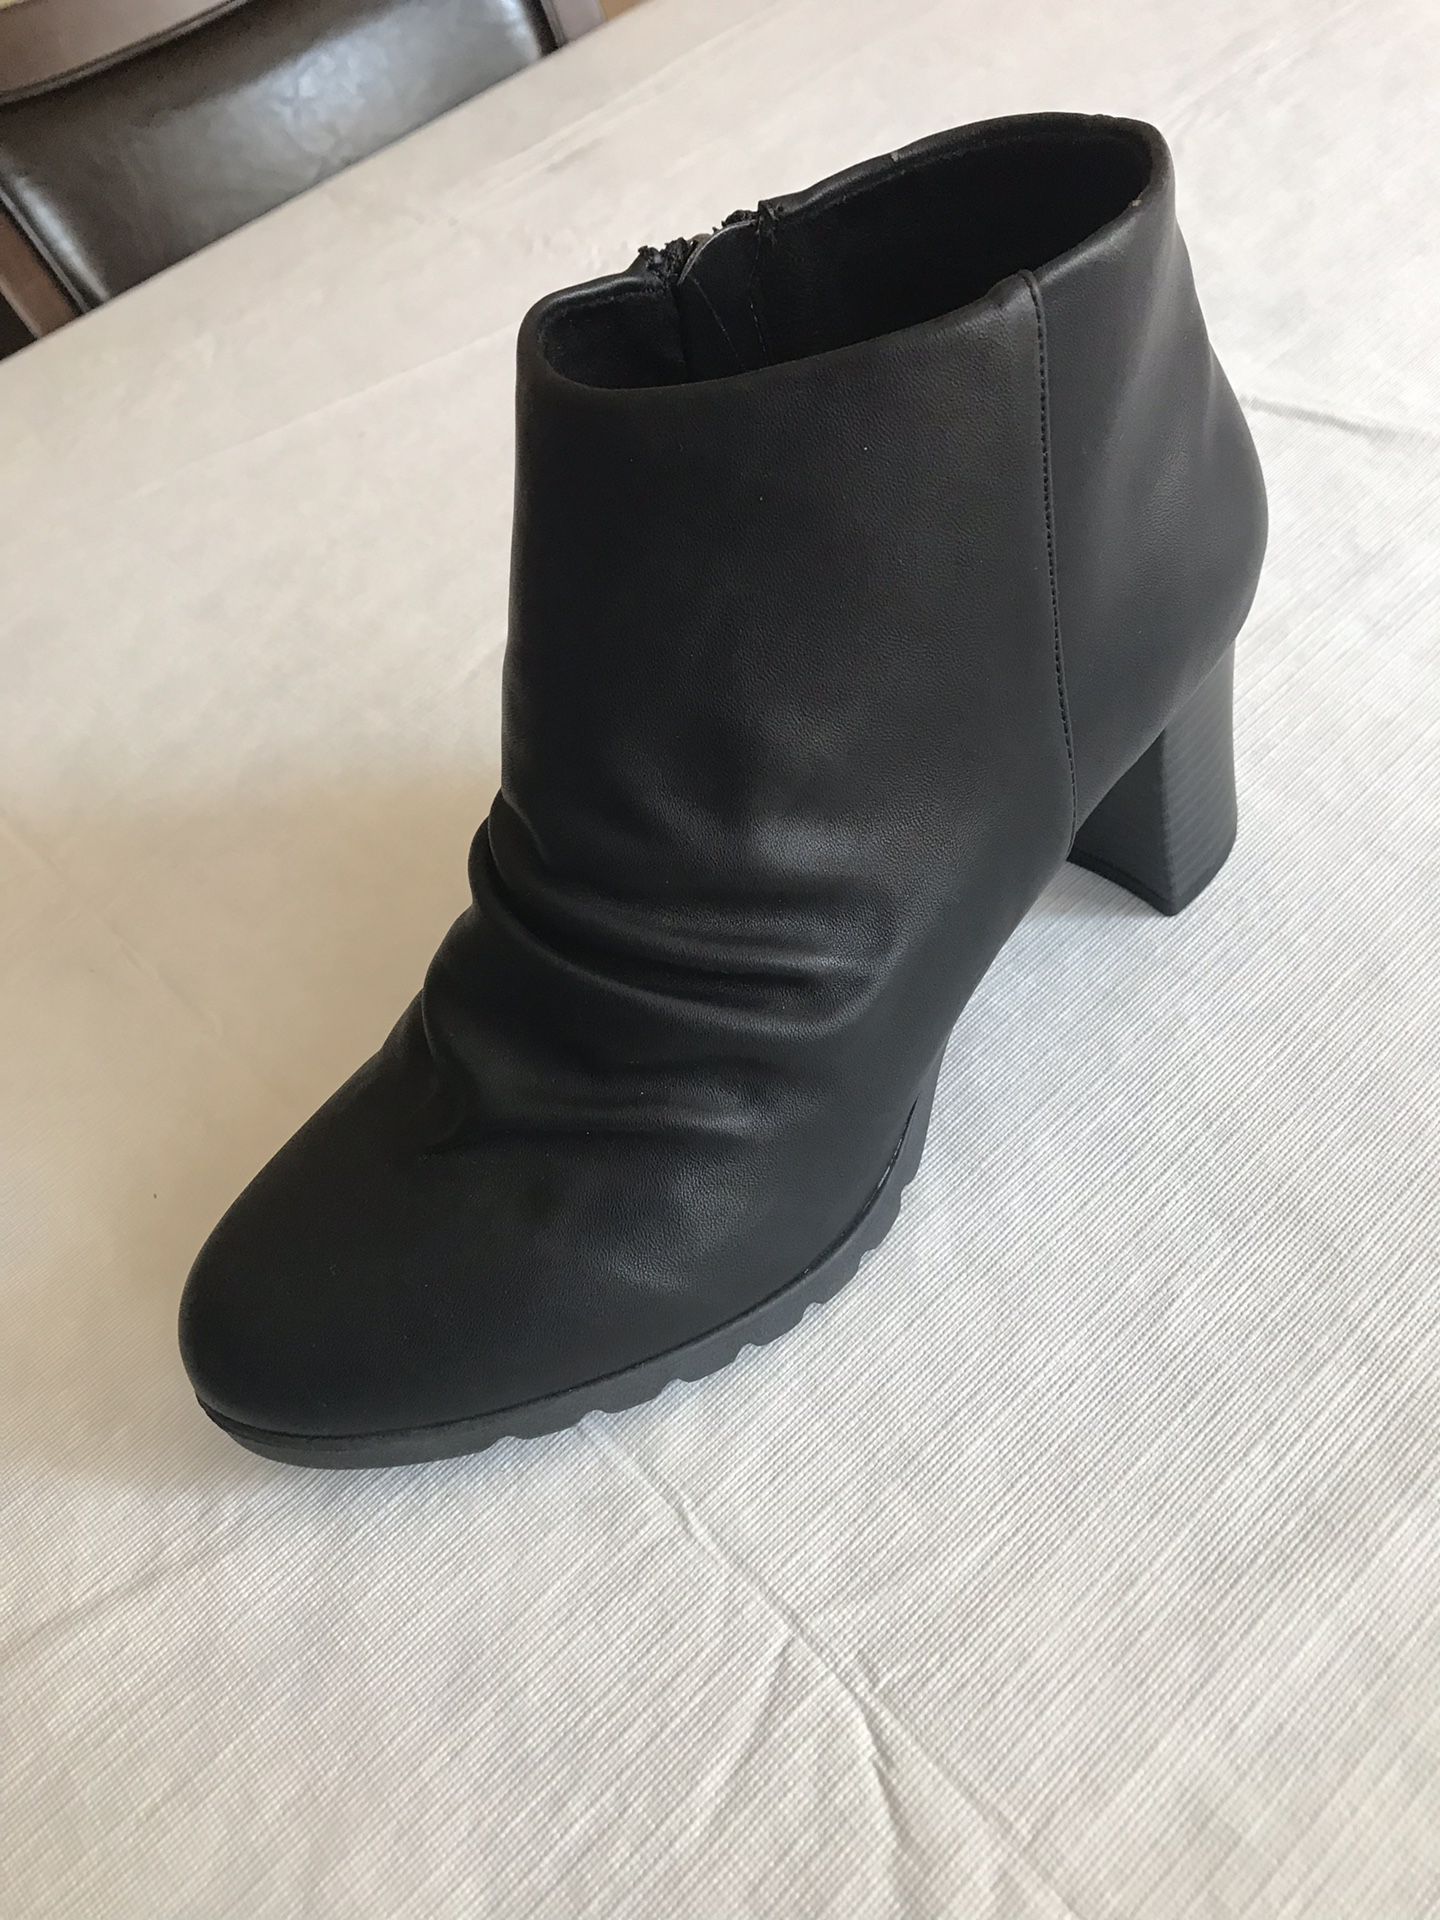 Women’s shoes ankle-high boots, black, size 9MW